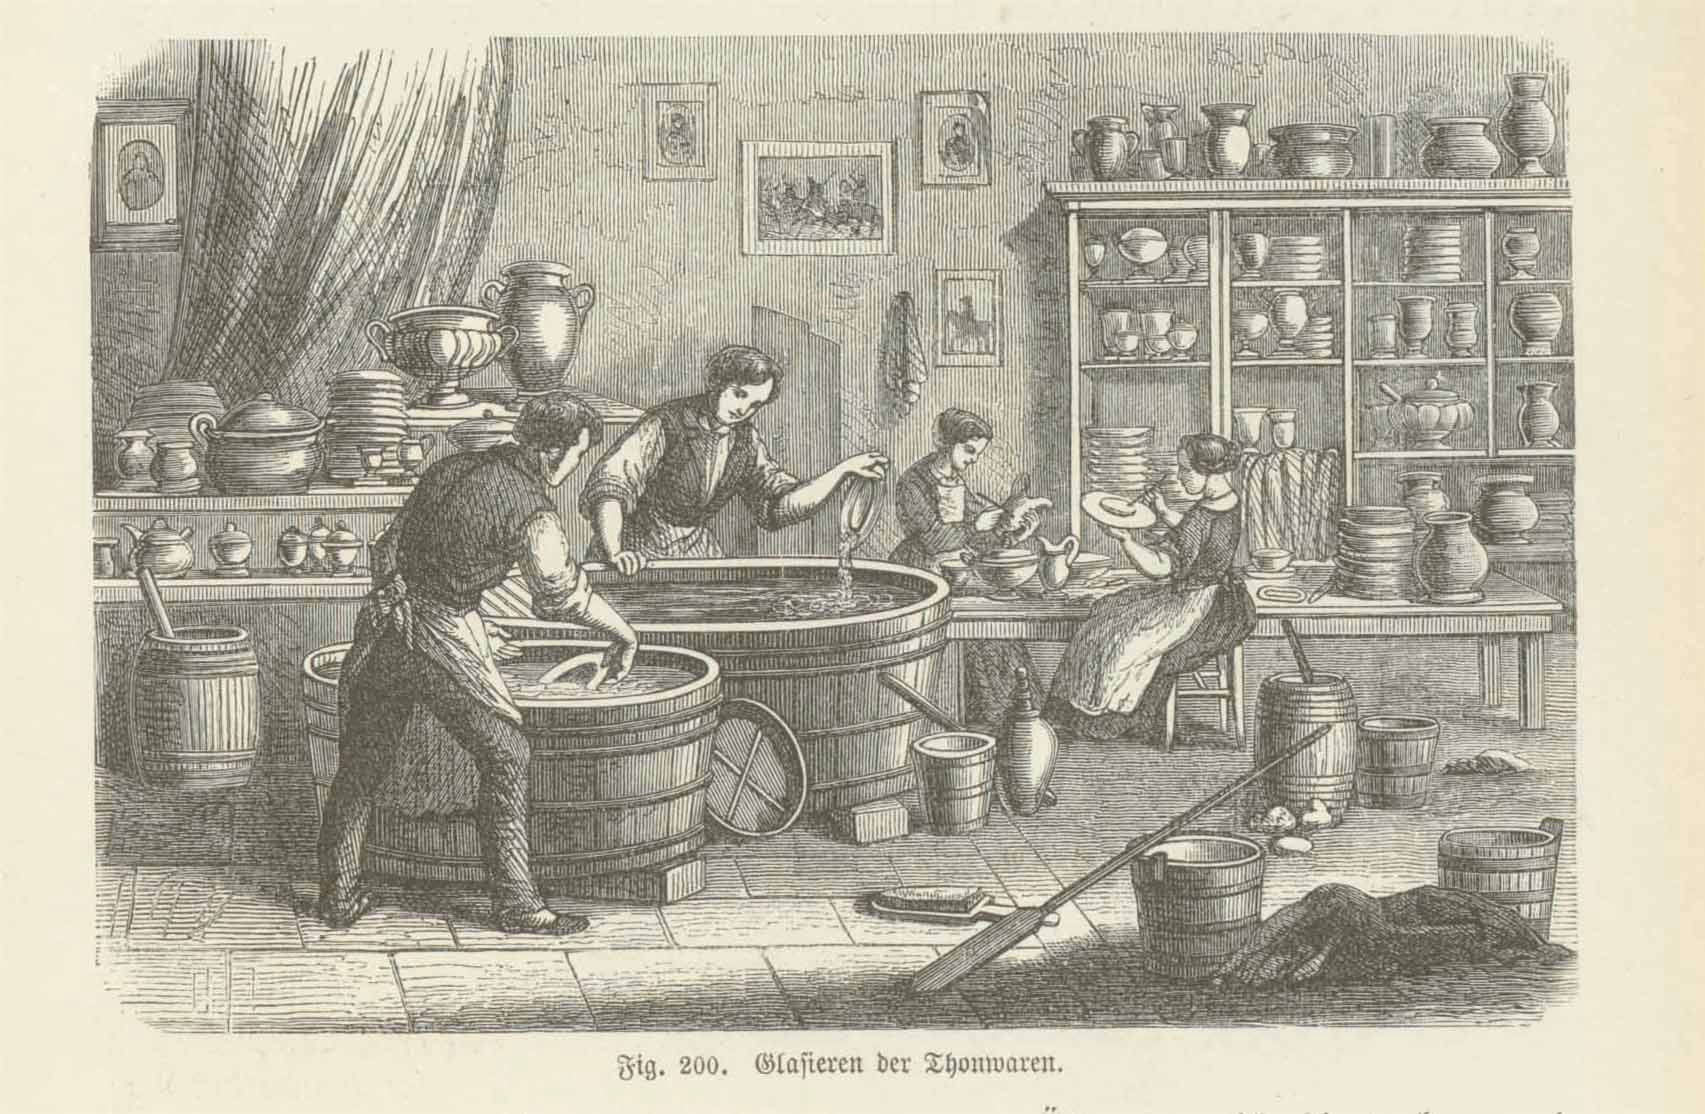 "Glasieren der Thonwaren" (putting the glaze on ceramics)  Wood engraving on a page of German text about ceramics and porcelaine. Text continues on reverse side where there is an image of a terracotta by Luca della Robbia" Published 1886.